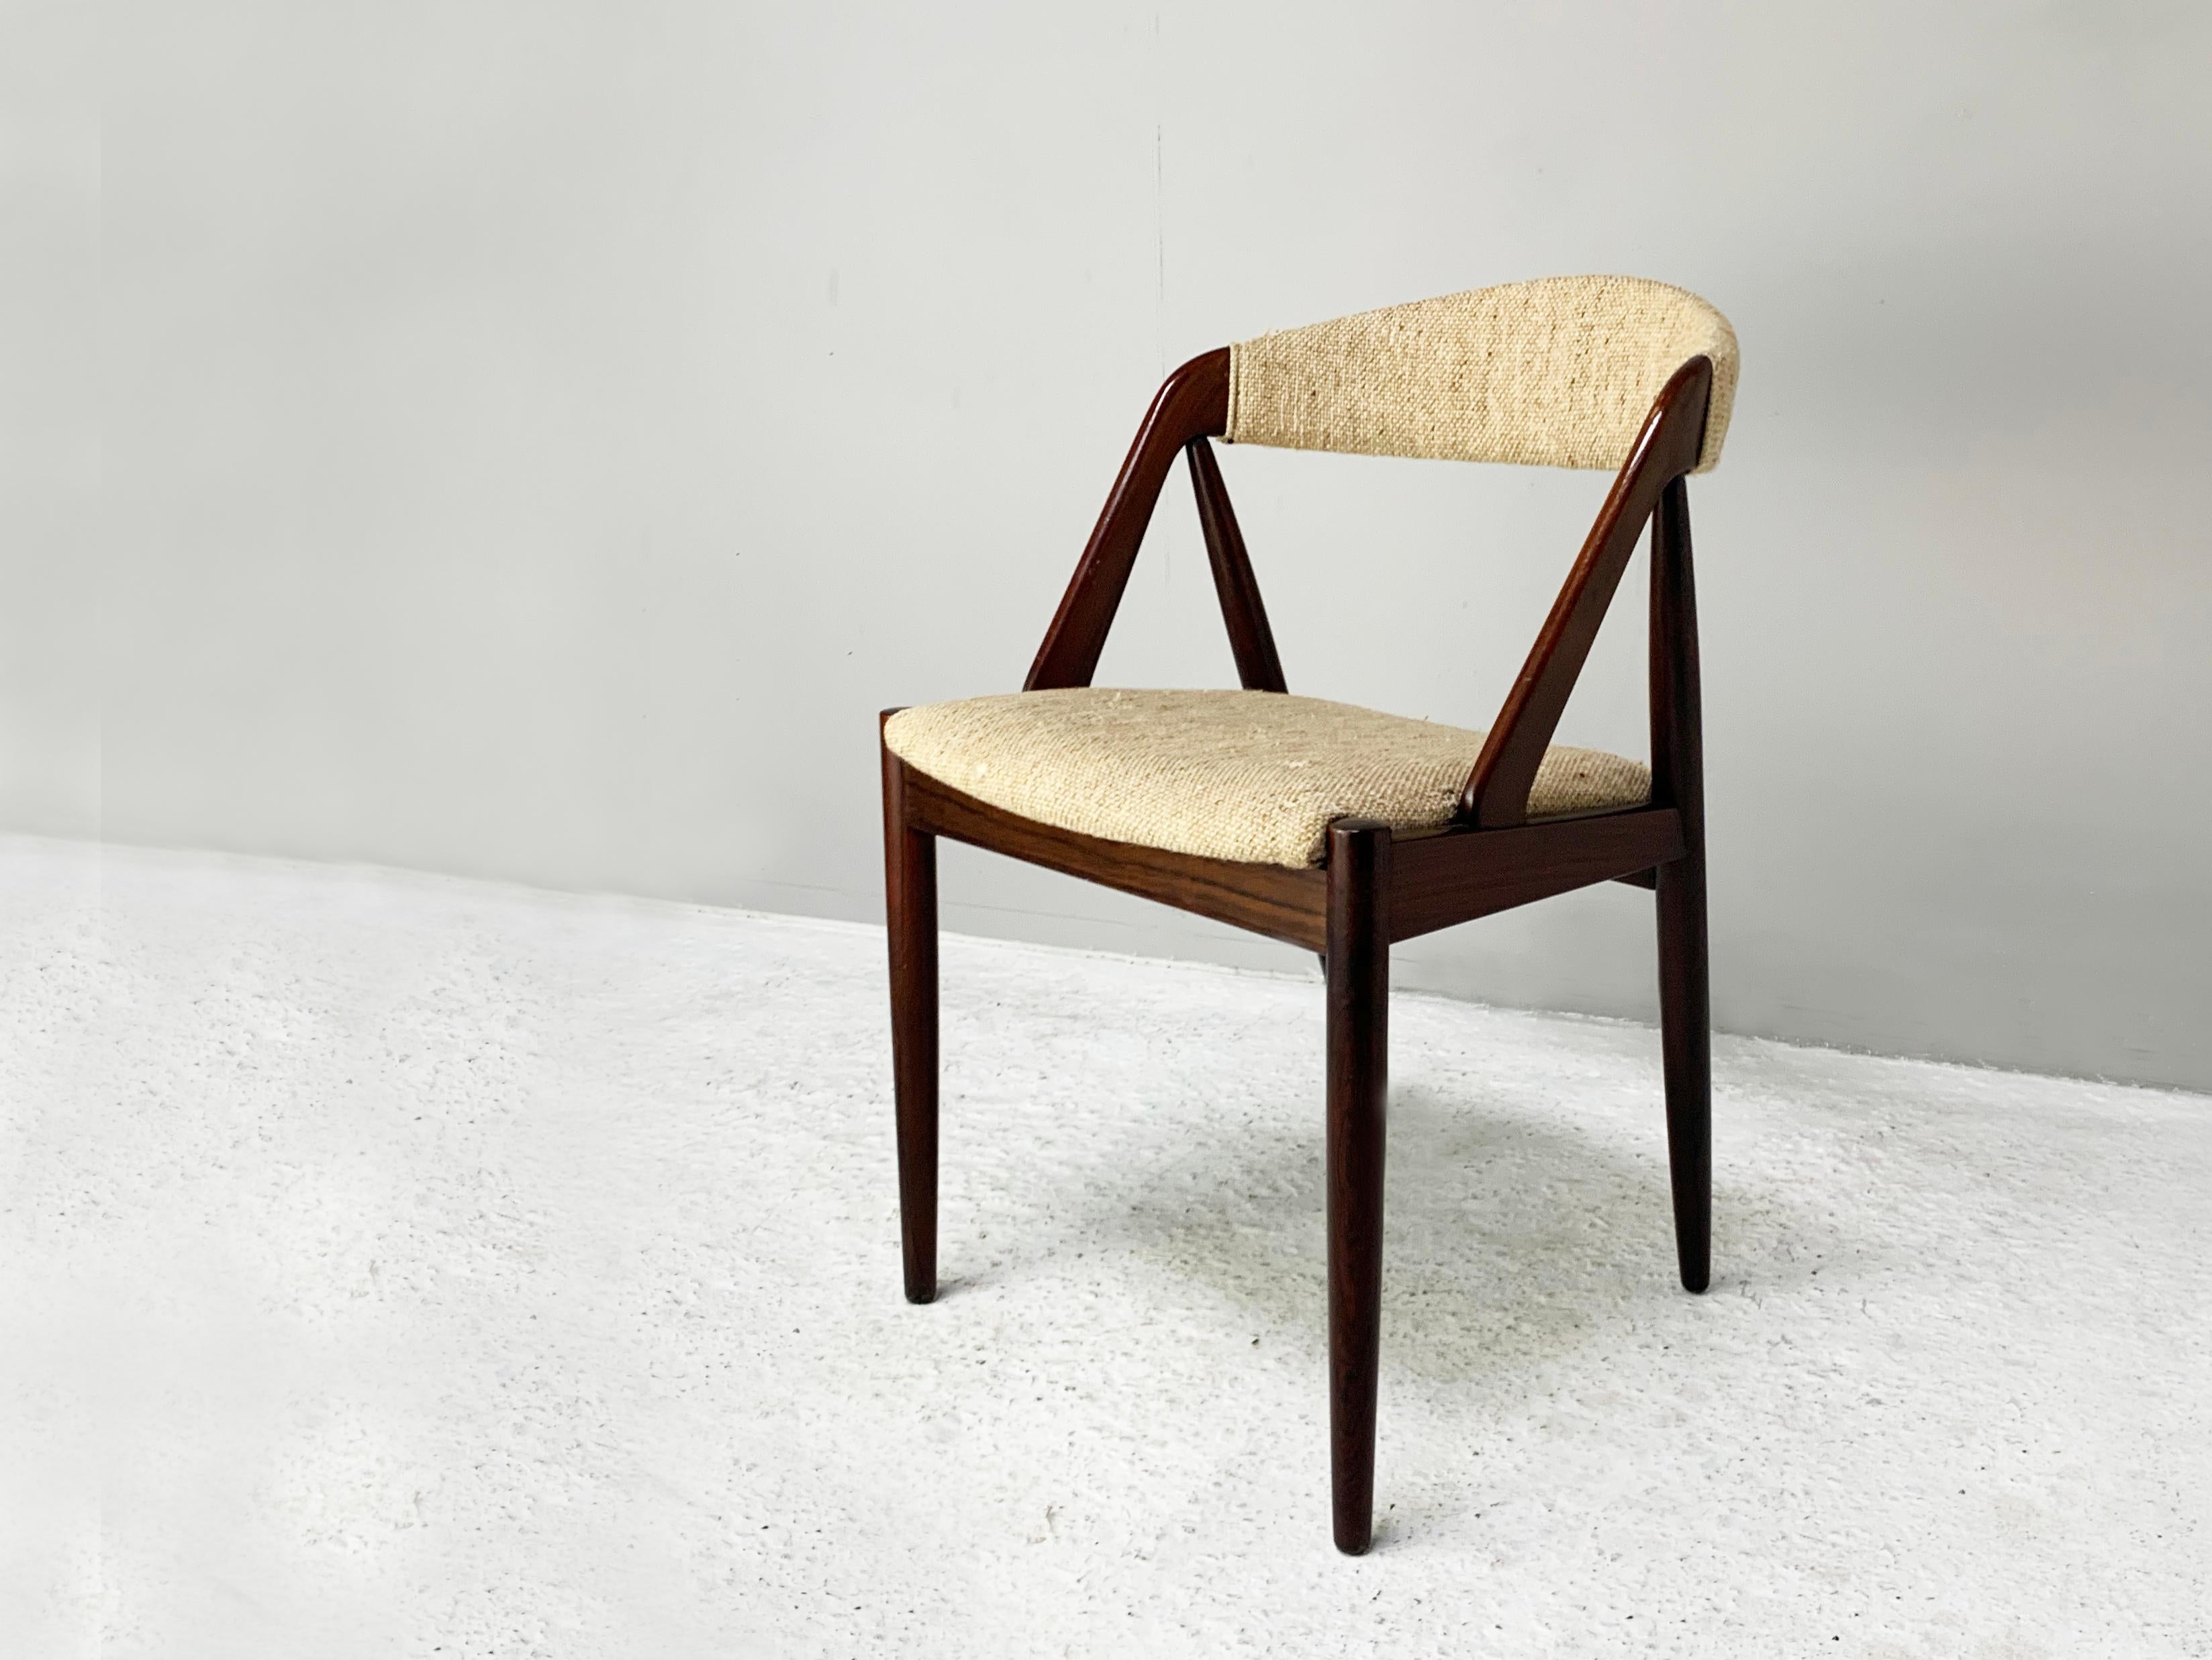 The price listed is for one chair. There are two chairs available.

Two model 31, chairs designed by Kai Kristiansen in 1956 and manufactured by Schou Andersen Mobelfabrik in the 1960’s.

This chair with it’s classic silhouette, is an iconic and